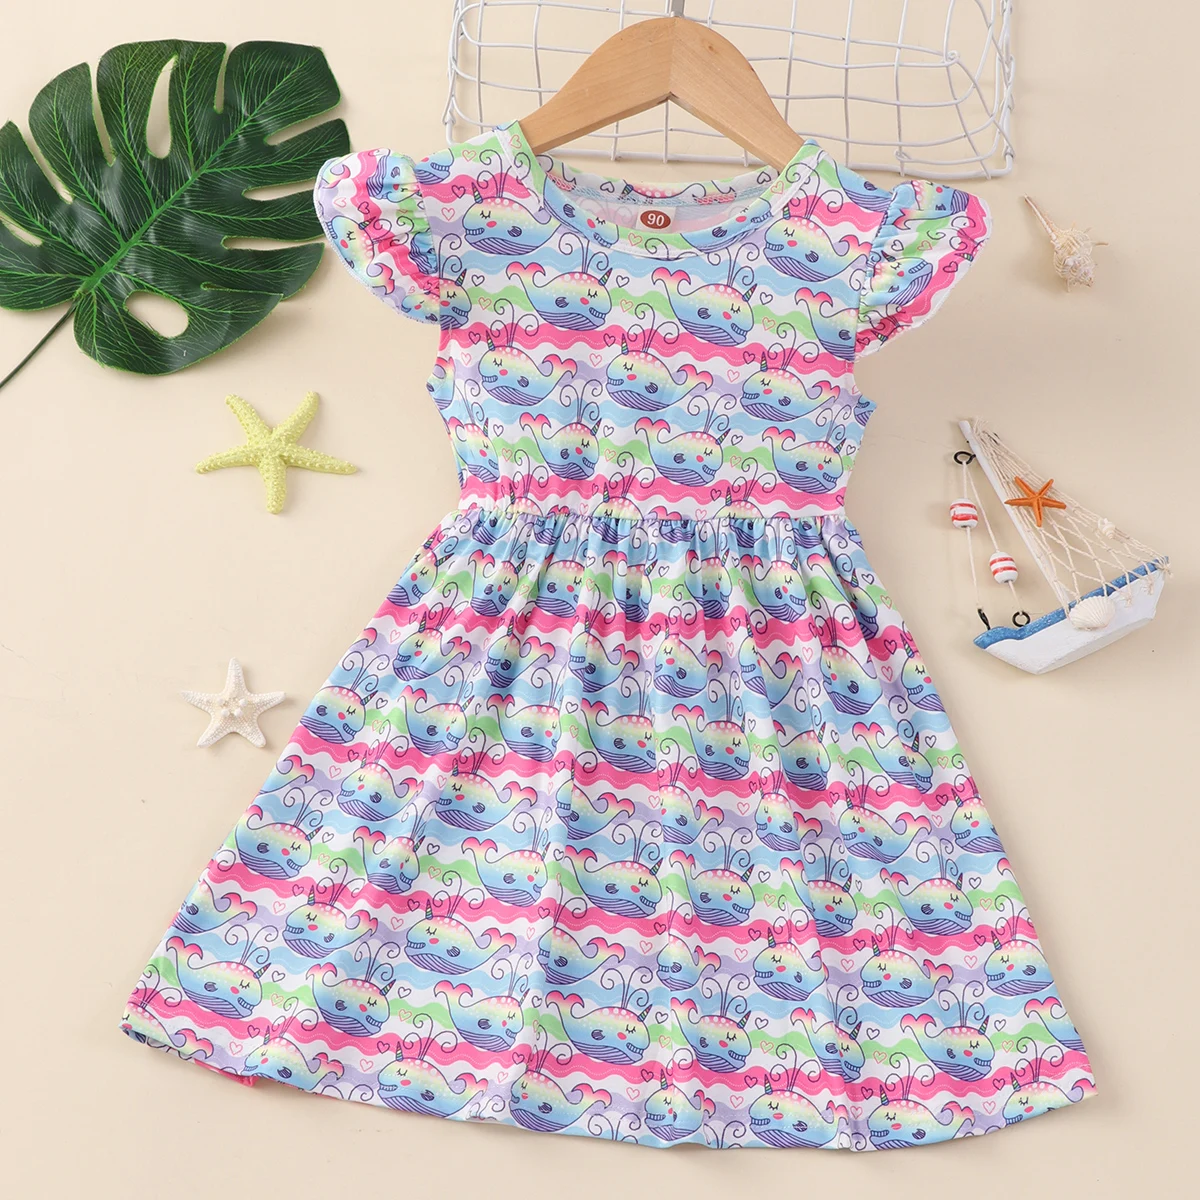 

Summer Dress for Girls Lovely Cartoon Animal dolphin Flying Sleeve Kids Dresses Cotton Ruffles New Toddler Girl Clothes 1-7Y